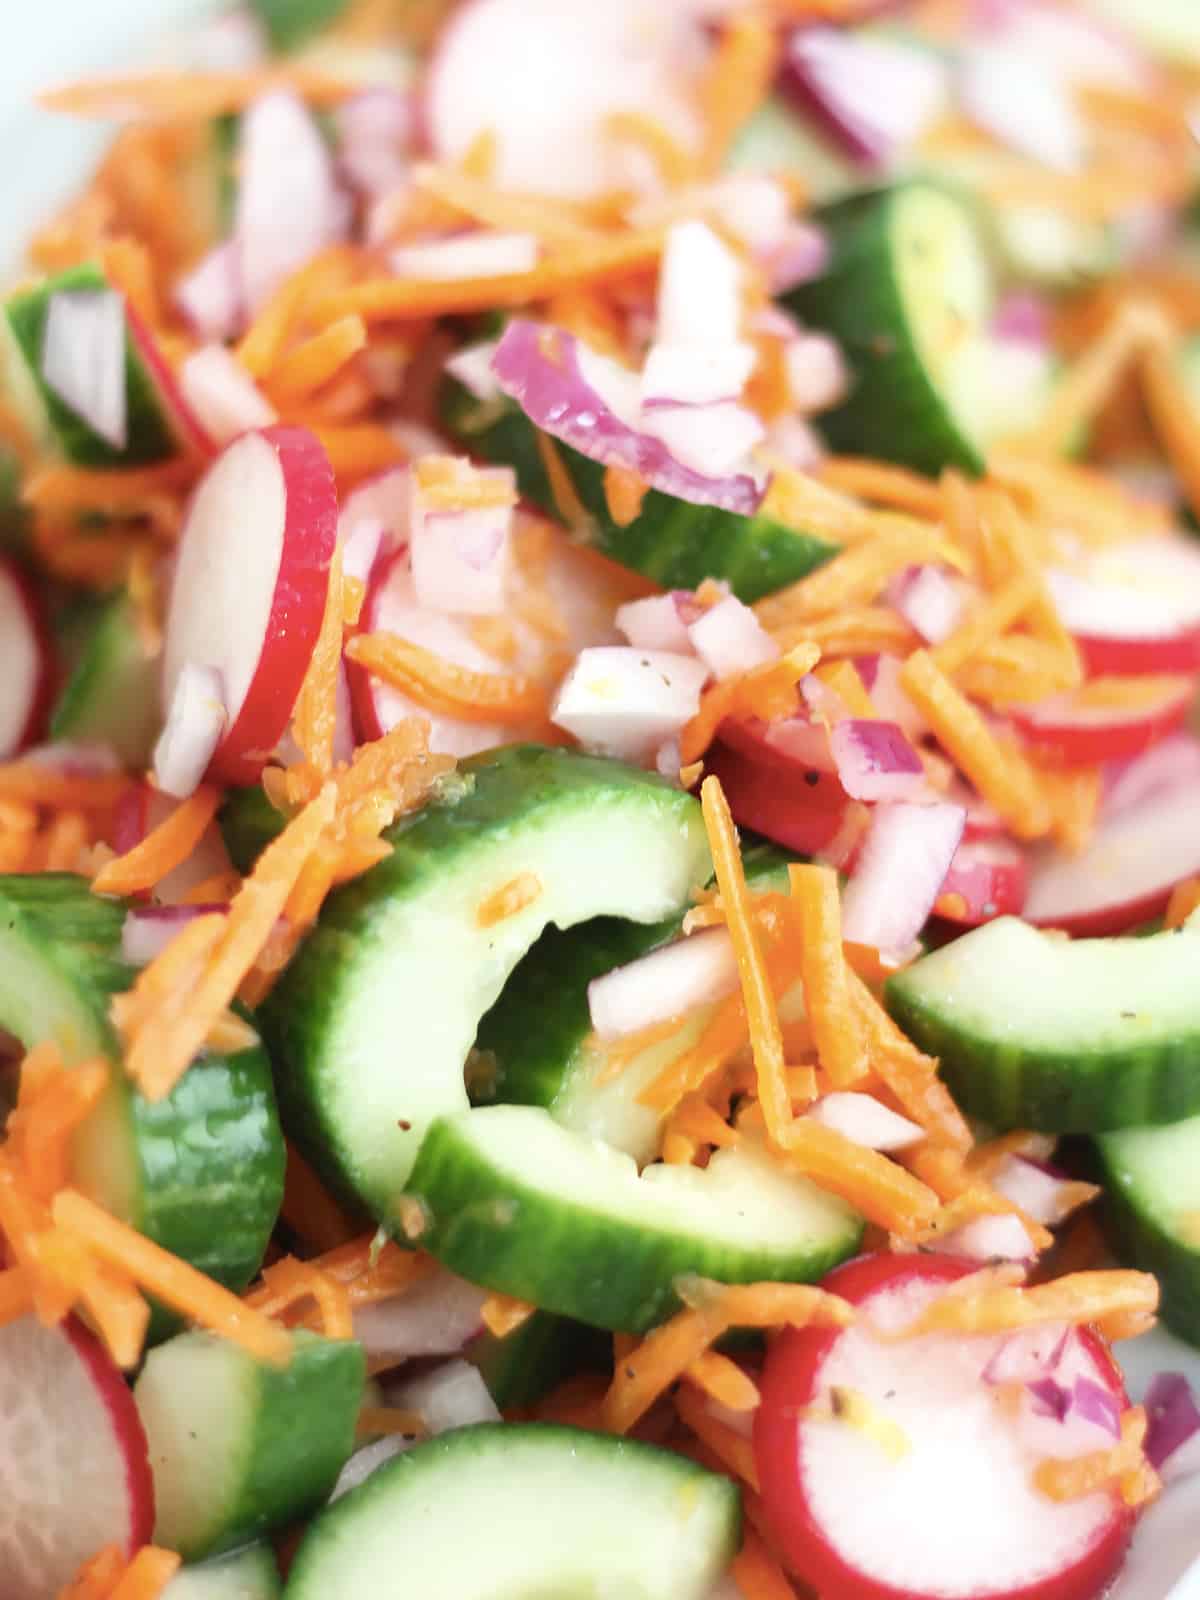 Sliced cucumber mixed with grated carrot and sliced radishes and red onion.